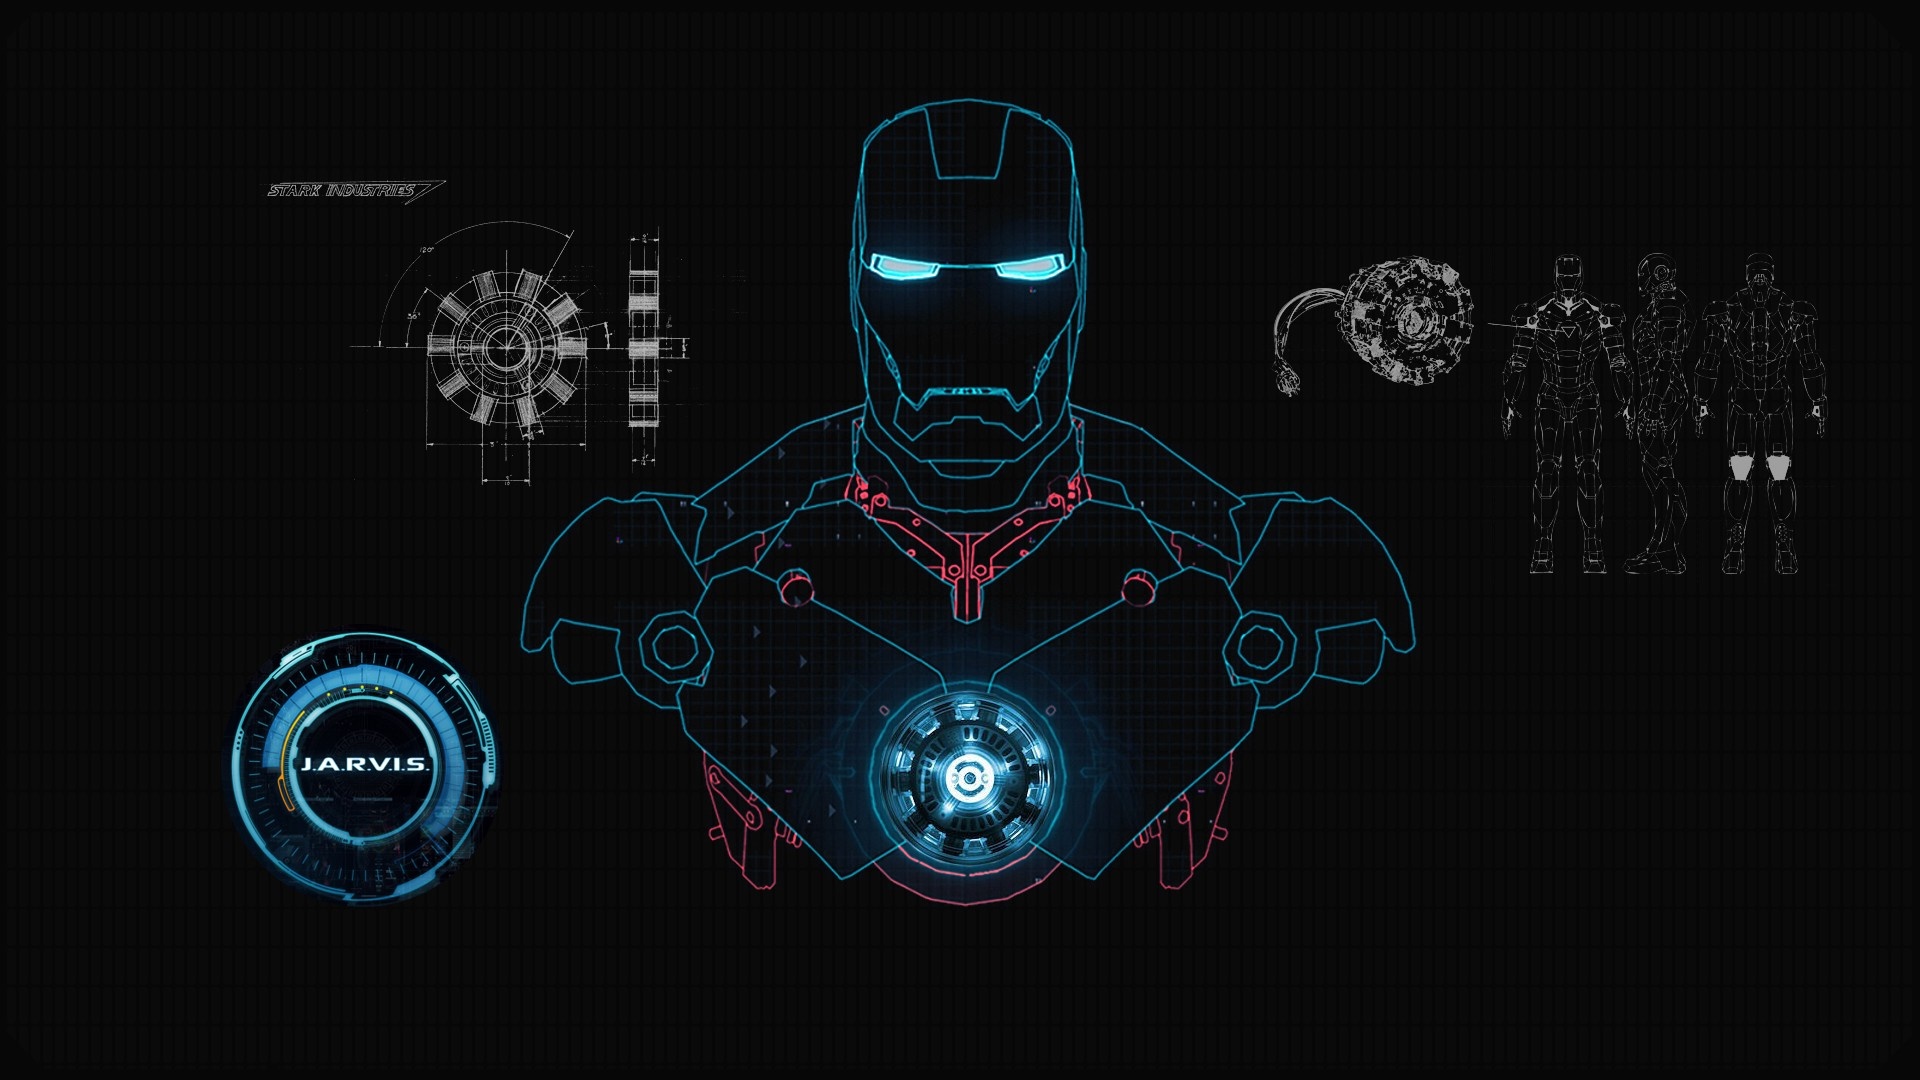 Jarvis (Iron Man) and AI, Fiction or reality?, Mirek Stanek online, Fascinating technological concept, 1920x1080 Full HD Desktop